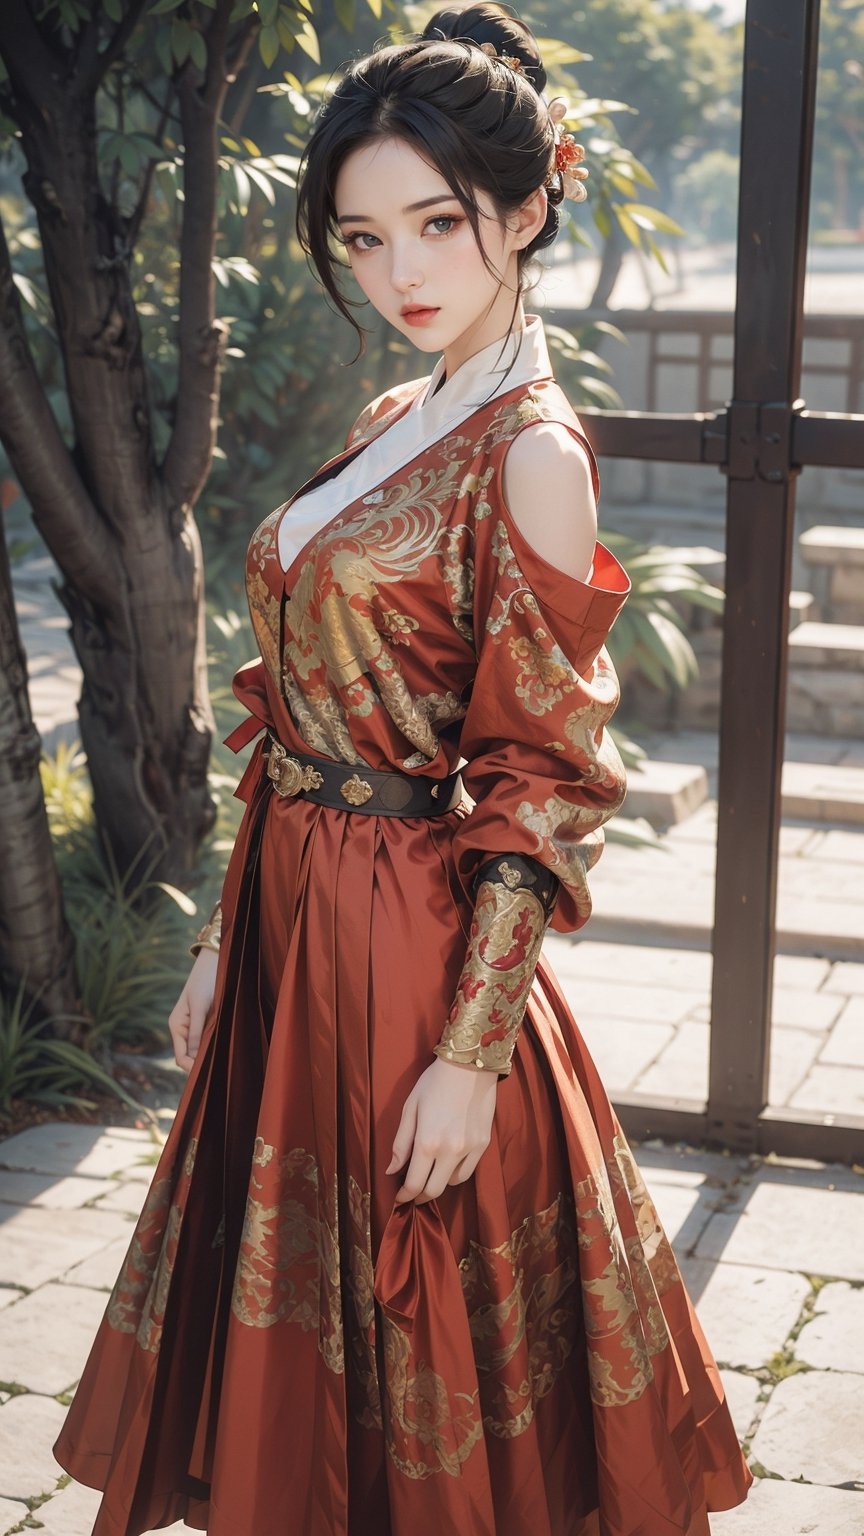 (Extremely detailed CG unified 8k wallpaper), ANCIENT_CHINESE_CASTLE_GARDEN_BACKGROUND, (((Masterpiece))), (((Best Quality))), ((Super Detailed)), (Best Illustration), (Best Shading), ( (Extremely exquisite and beautiful)), embodying the charm of ancient princesses, exuding beauty, sexiness and charm, with natural medium breasts. Mesmerizing eyes convey mystery and seduction. Elegant and charming, with a slender figure and full of mystery. Off the shoulders, low cut. Ancient traditional royal kebaya decorated with intricate patterns or ornate details. Seductive and elegant pose, beautyniji